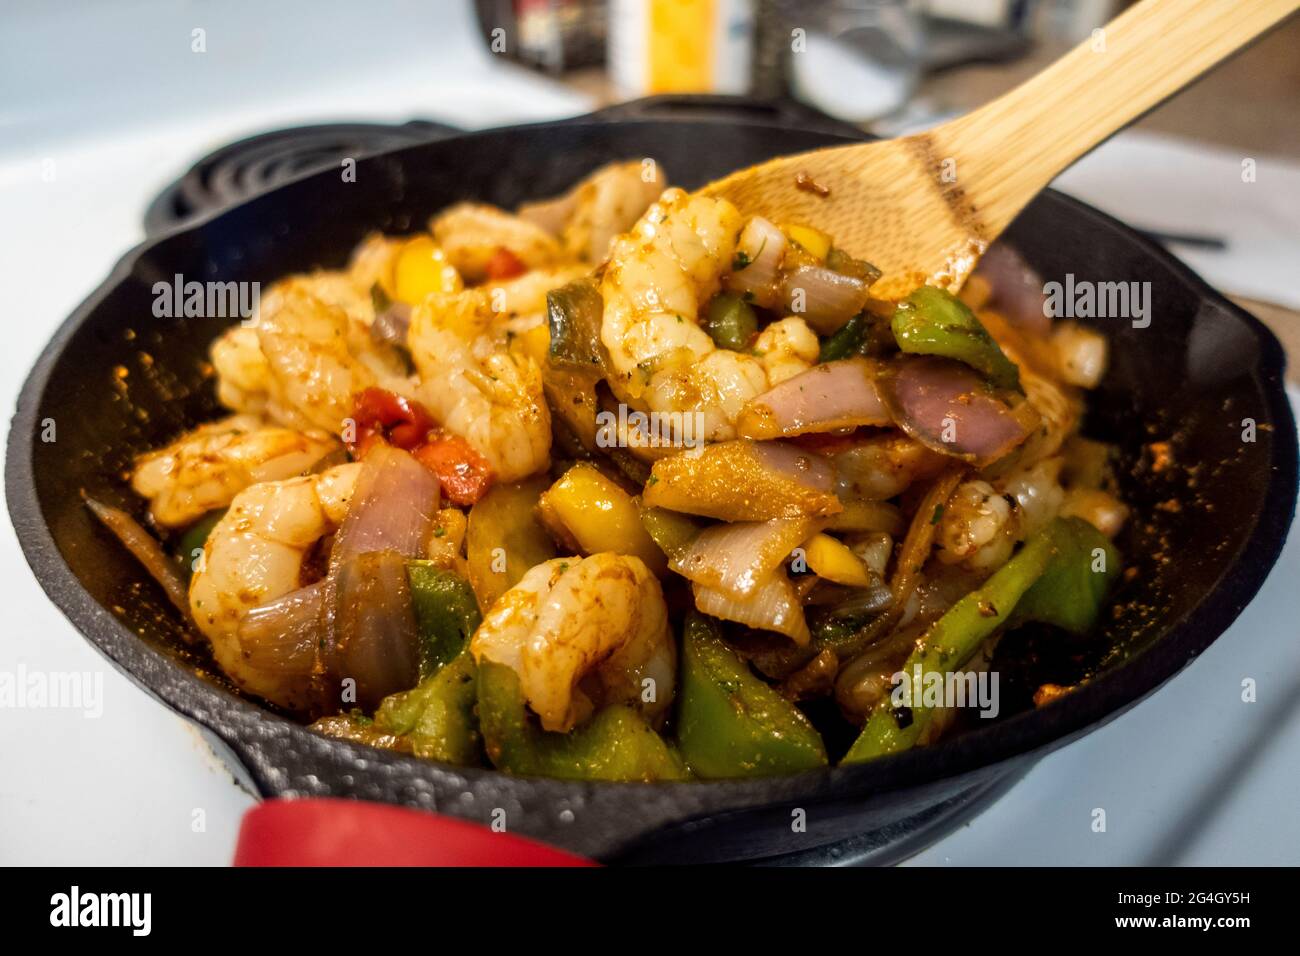 View of a wooden spoon stirring up shrimp and bell peppers, creating a fajita mixture in a cast iron skillet on a white stove top Stock Photo